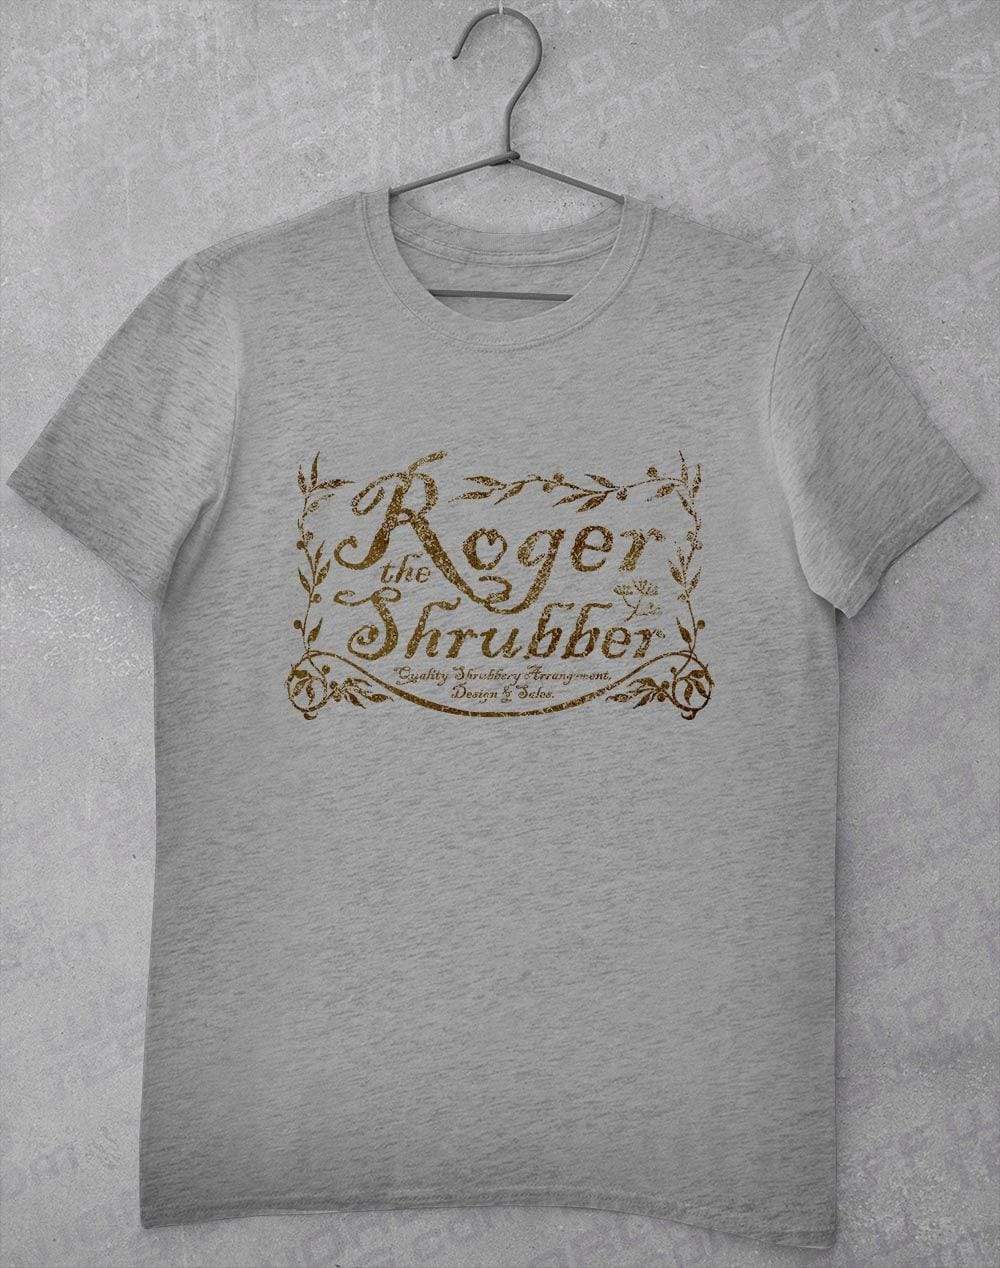 Roger the Shrubber T-Shirt S / Sport Grey  - Off World Tees